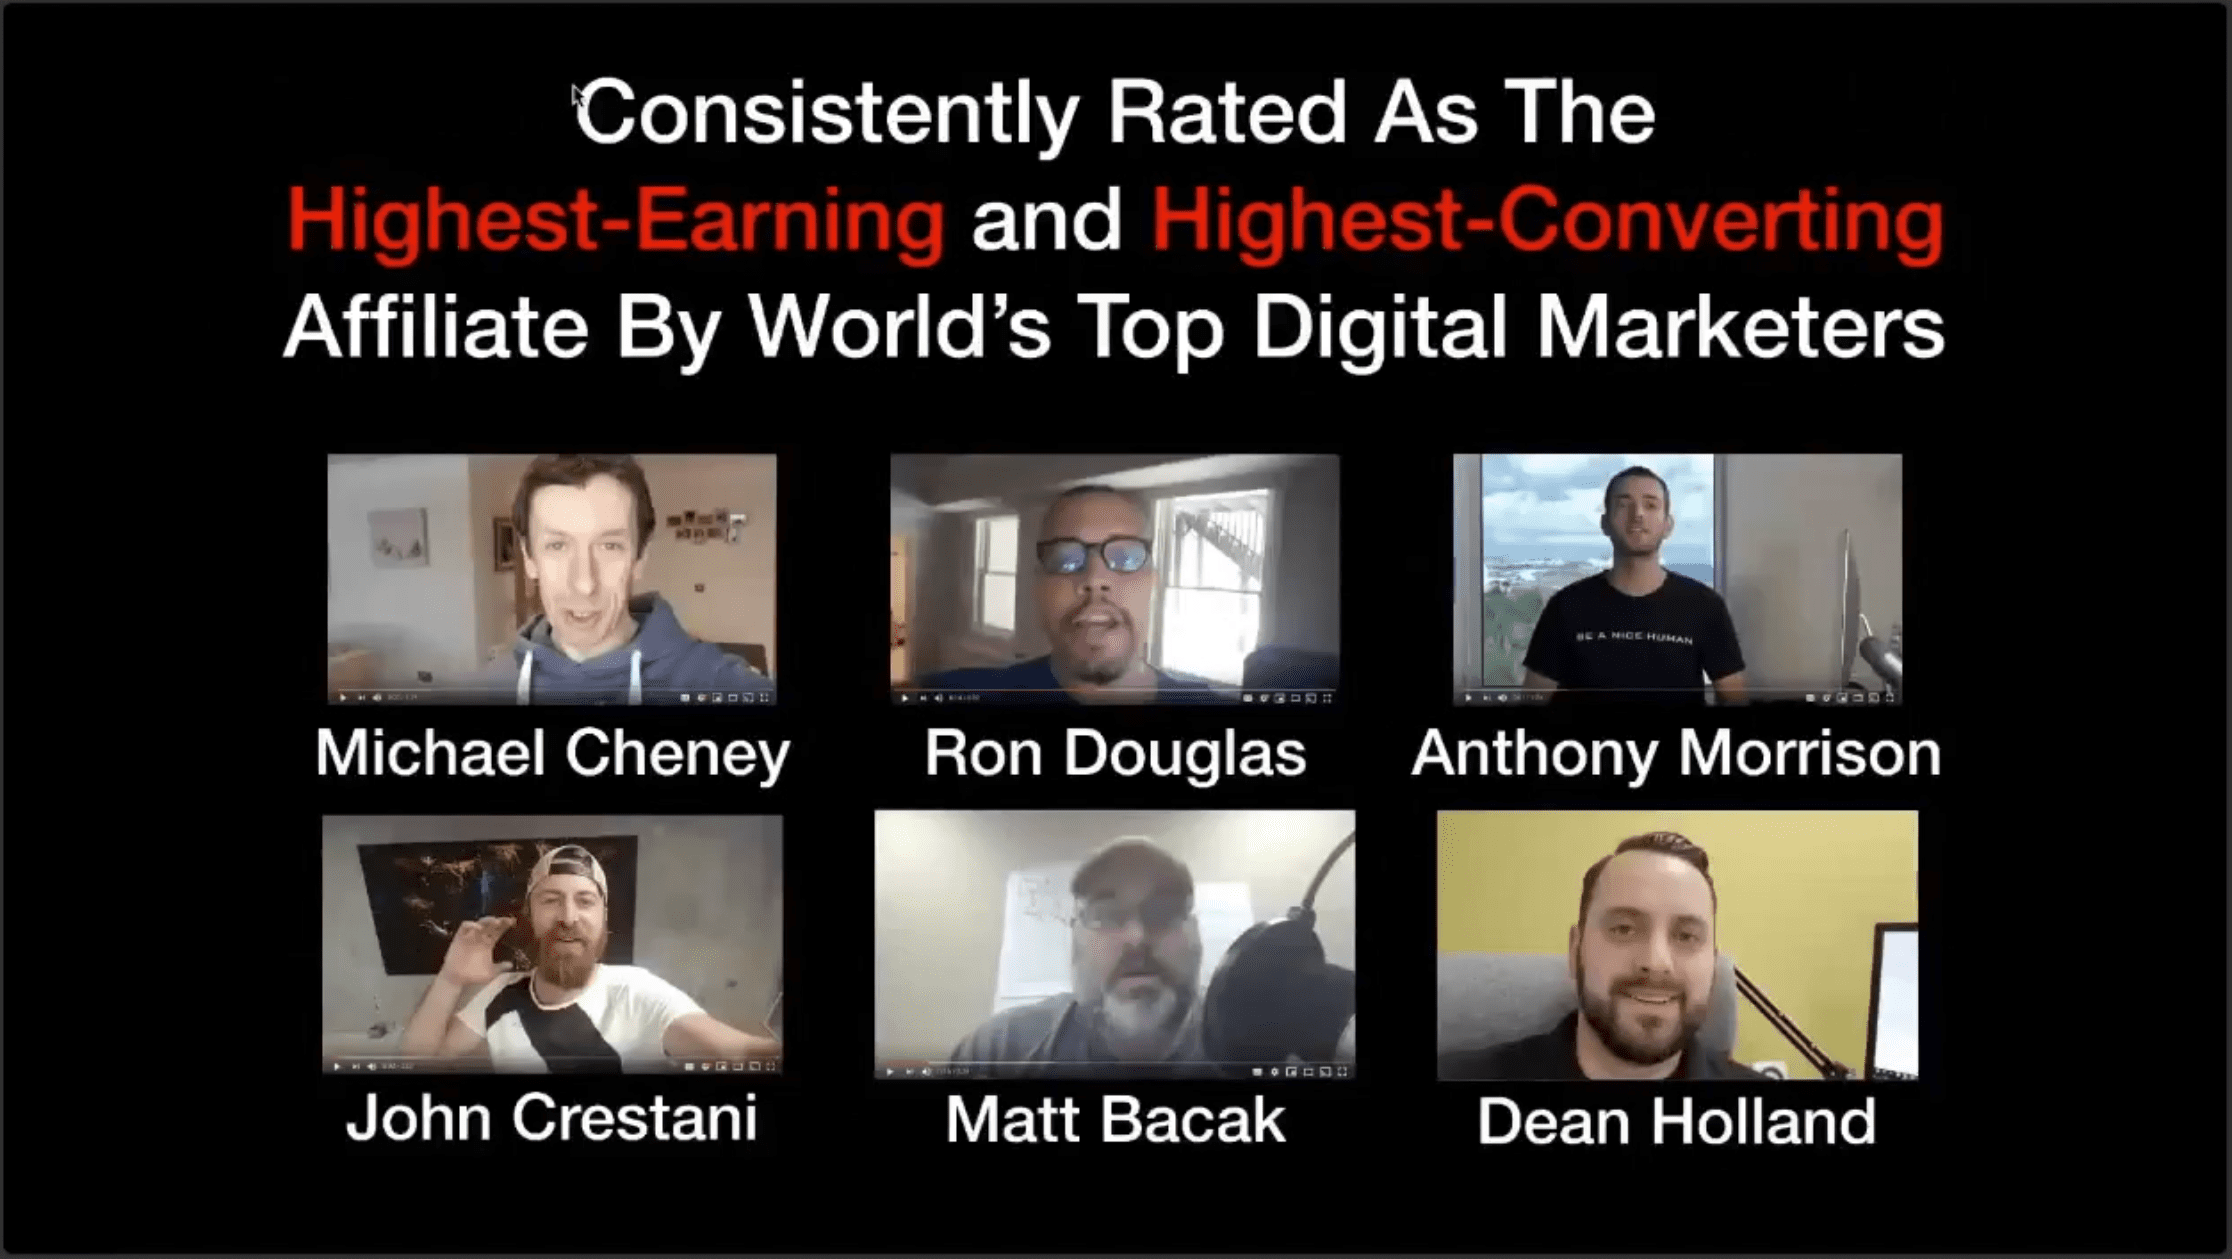 Igor Consistently Rated High By Top Digital Marketers